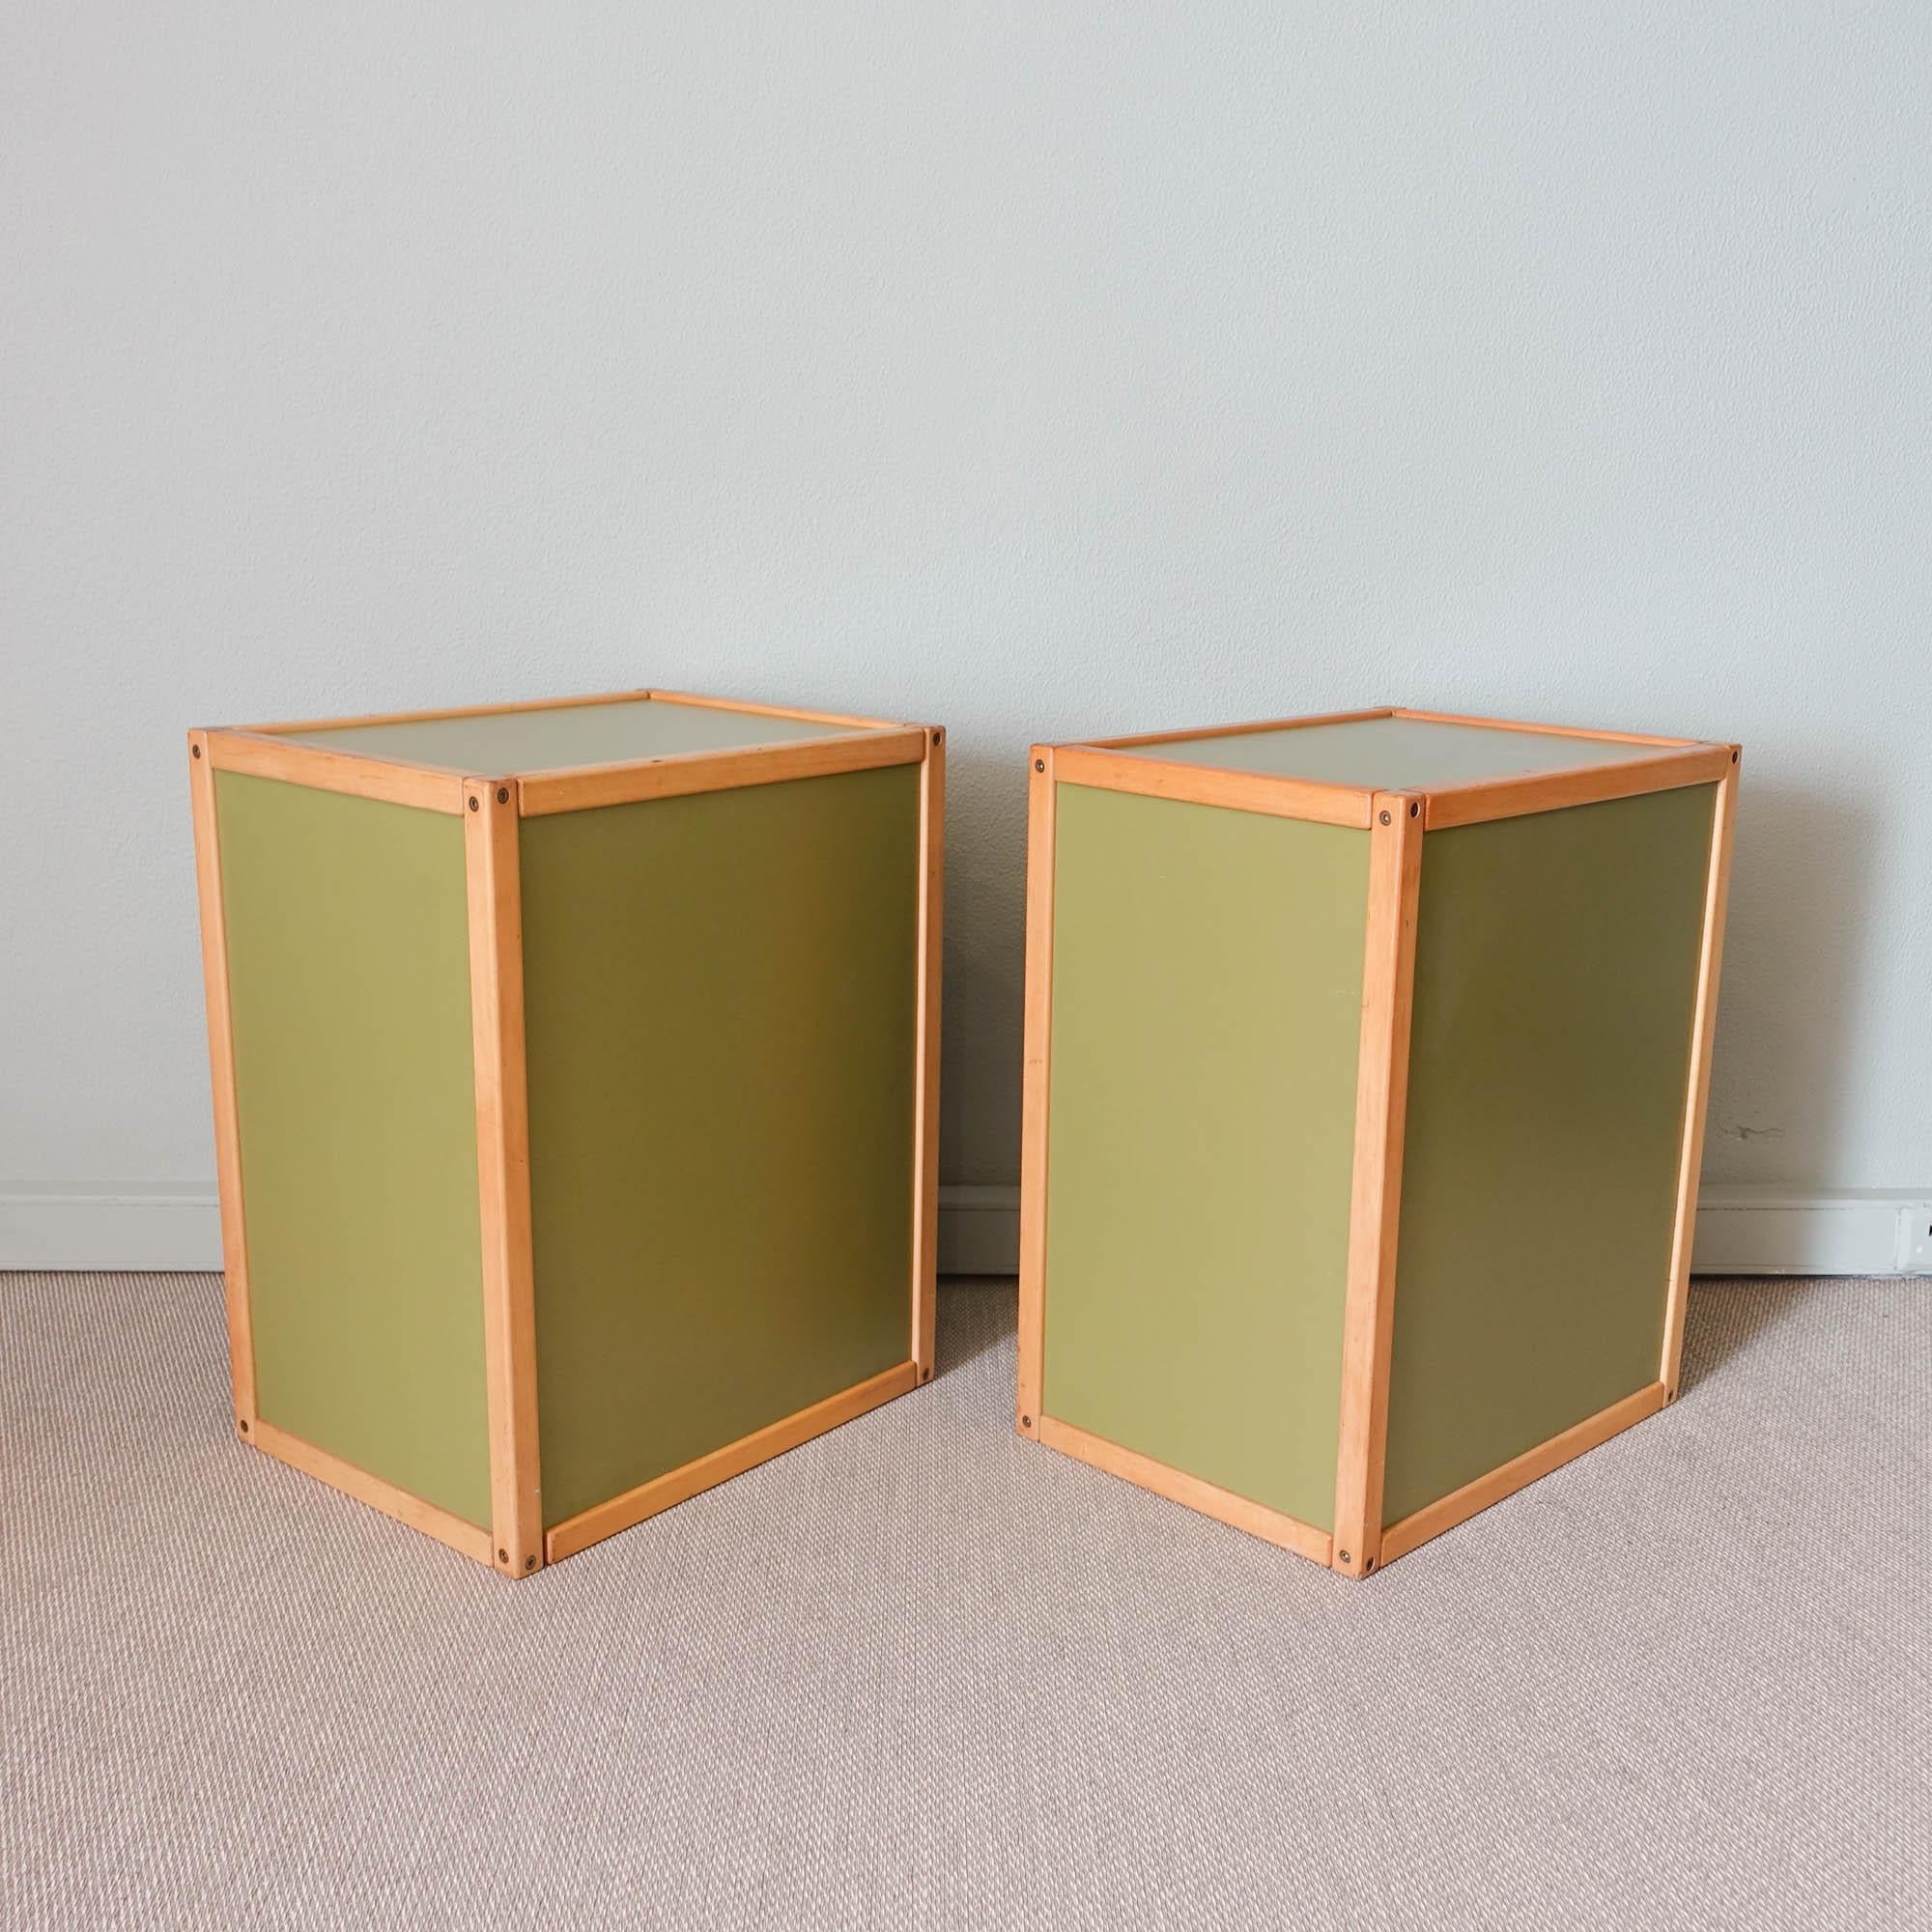 Pair of Vintage Profilsystem Collection Storage Units by Elmar Flötotto For Sale 3